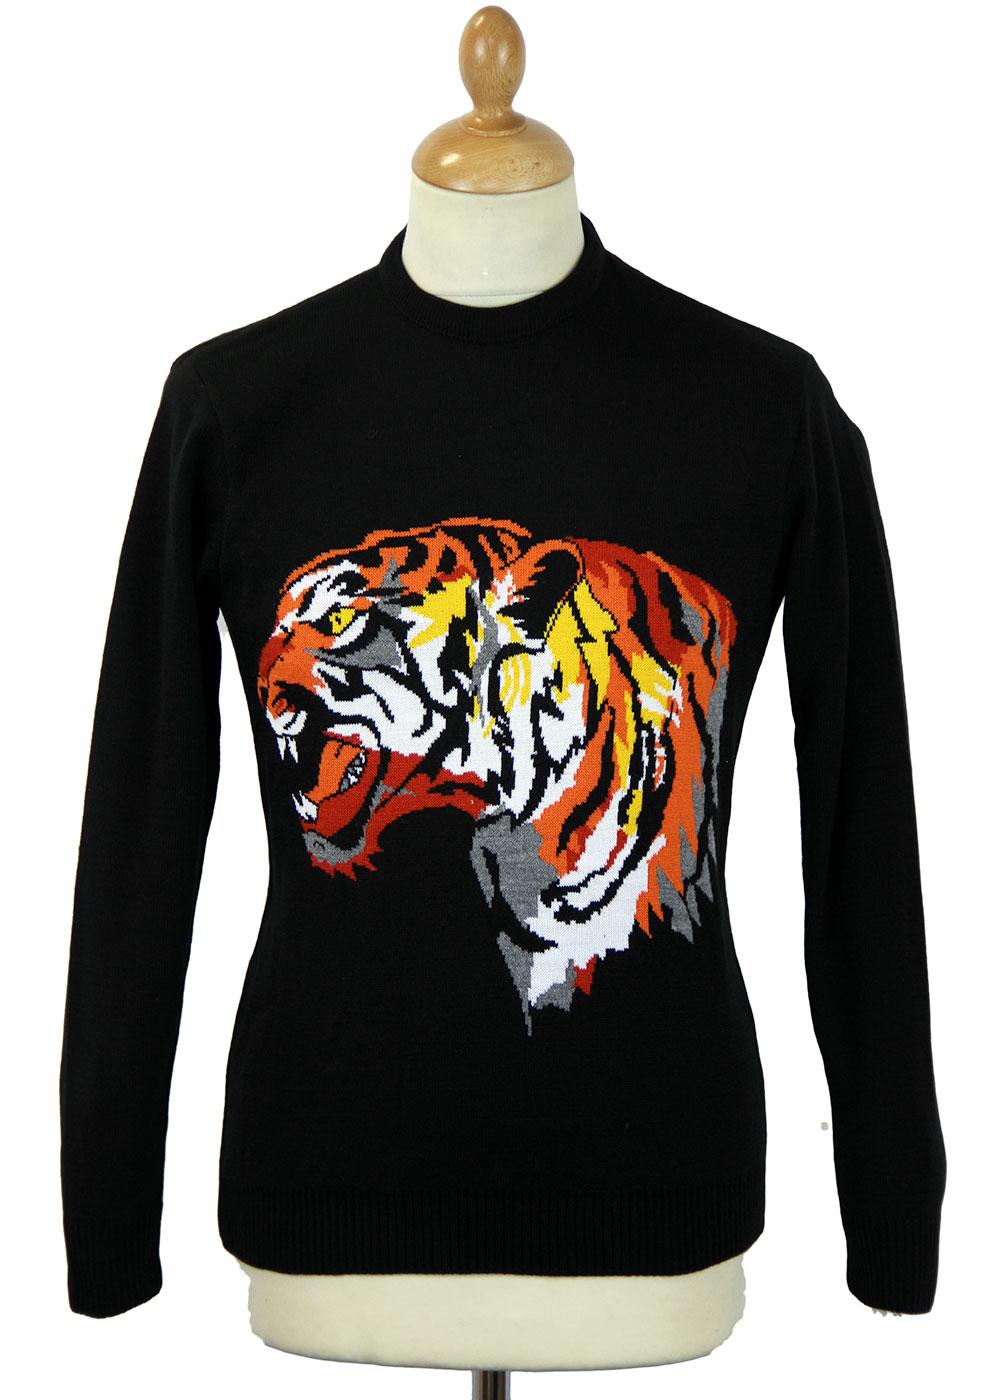 That's Neat, I Really Love Your Tiger Face Jumper